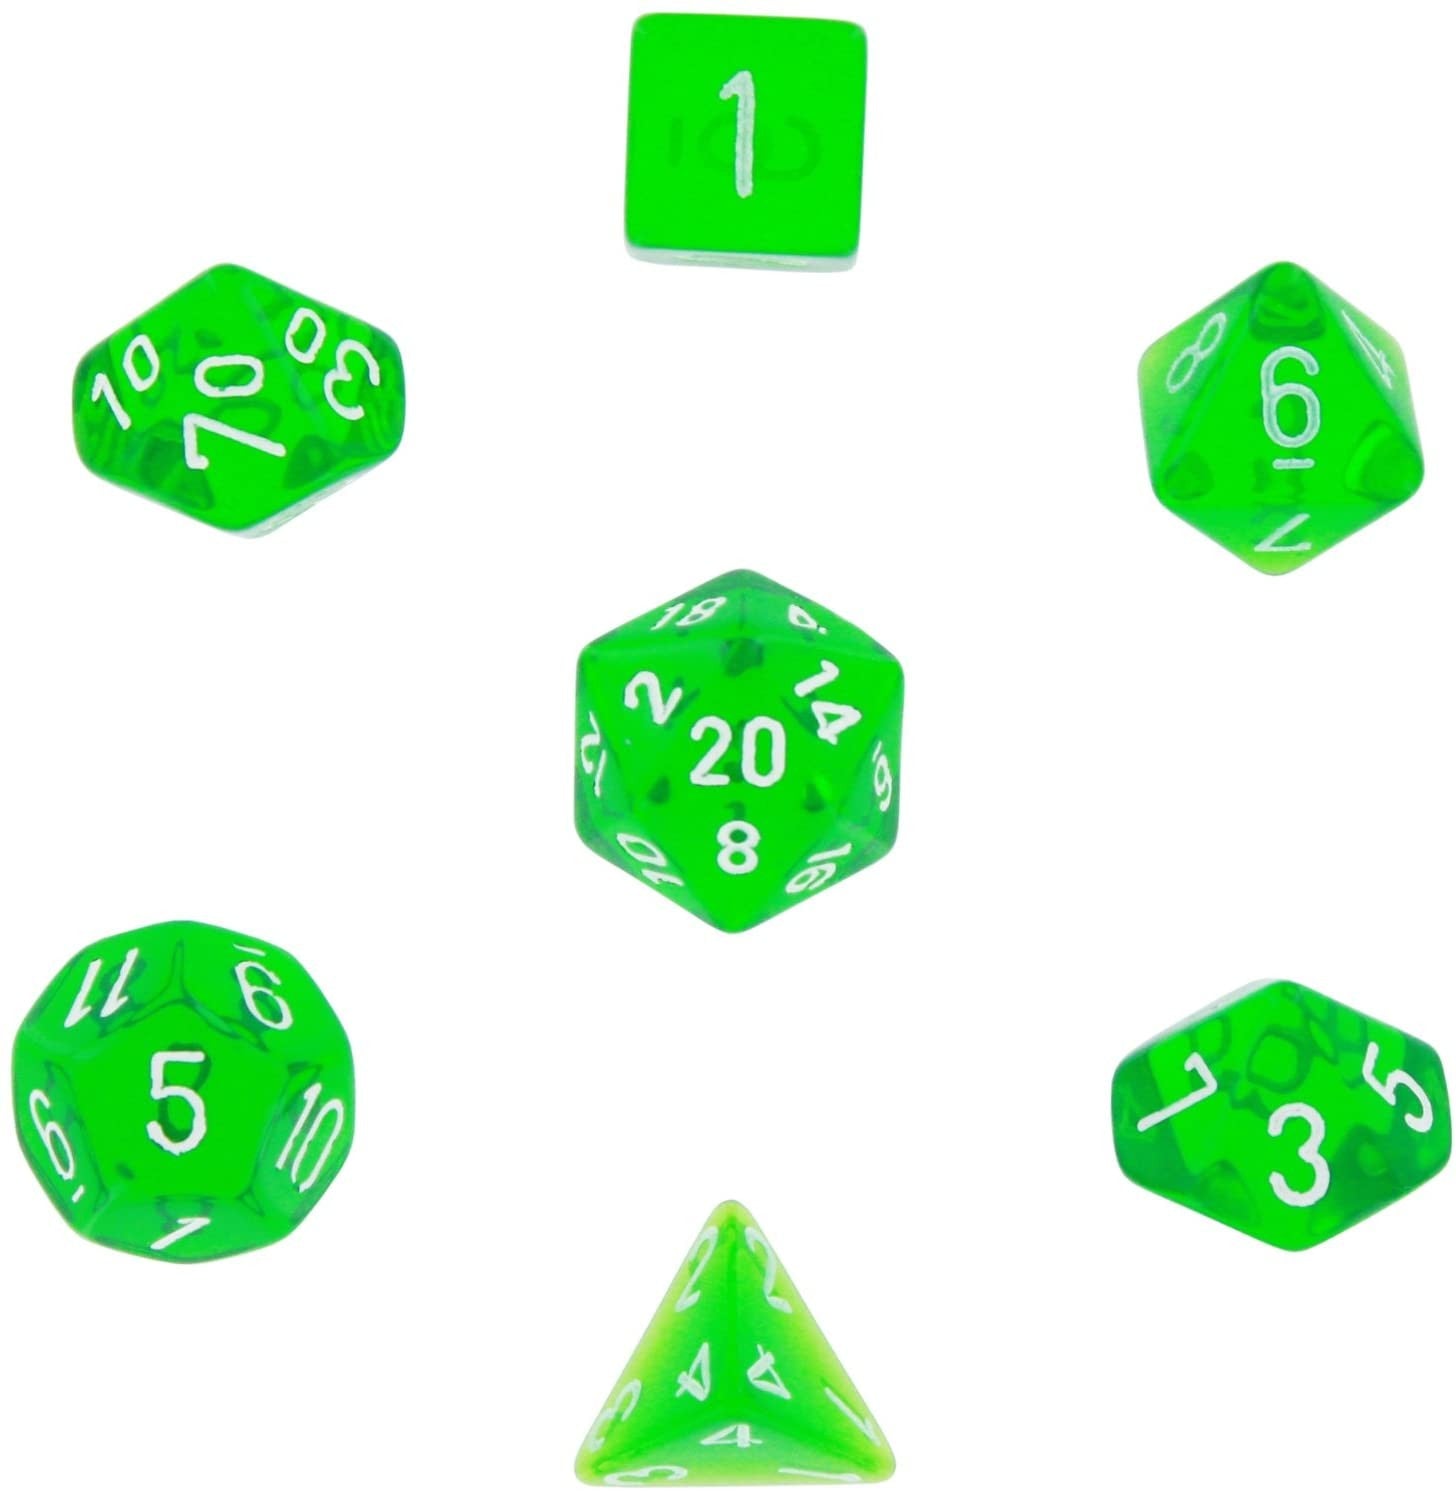 Polyhedral Dice Set: Translucent 7-Piece Set (box) - green with white